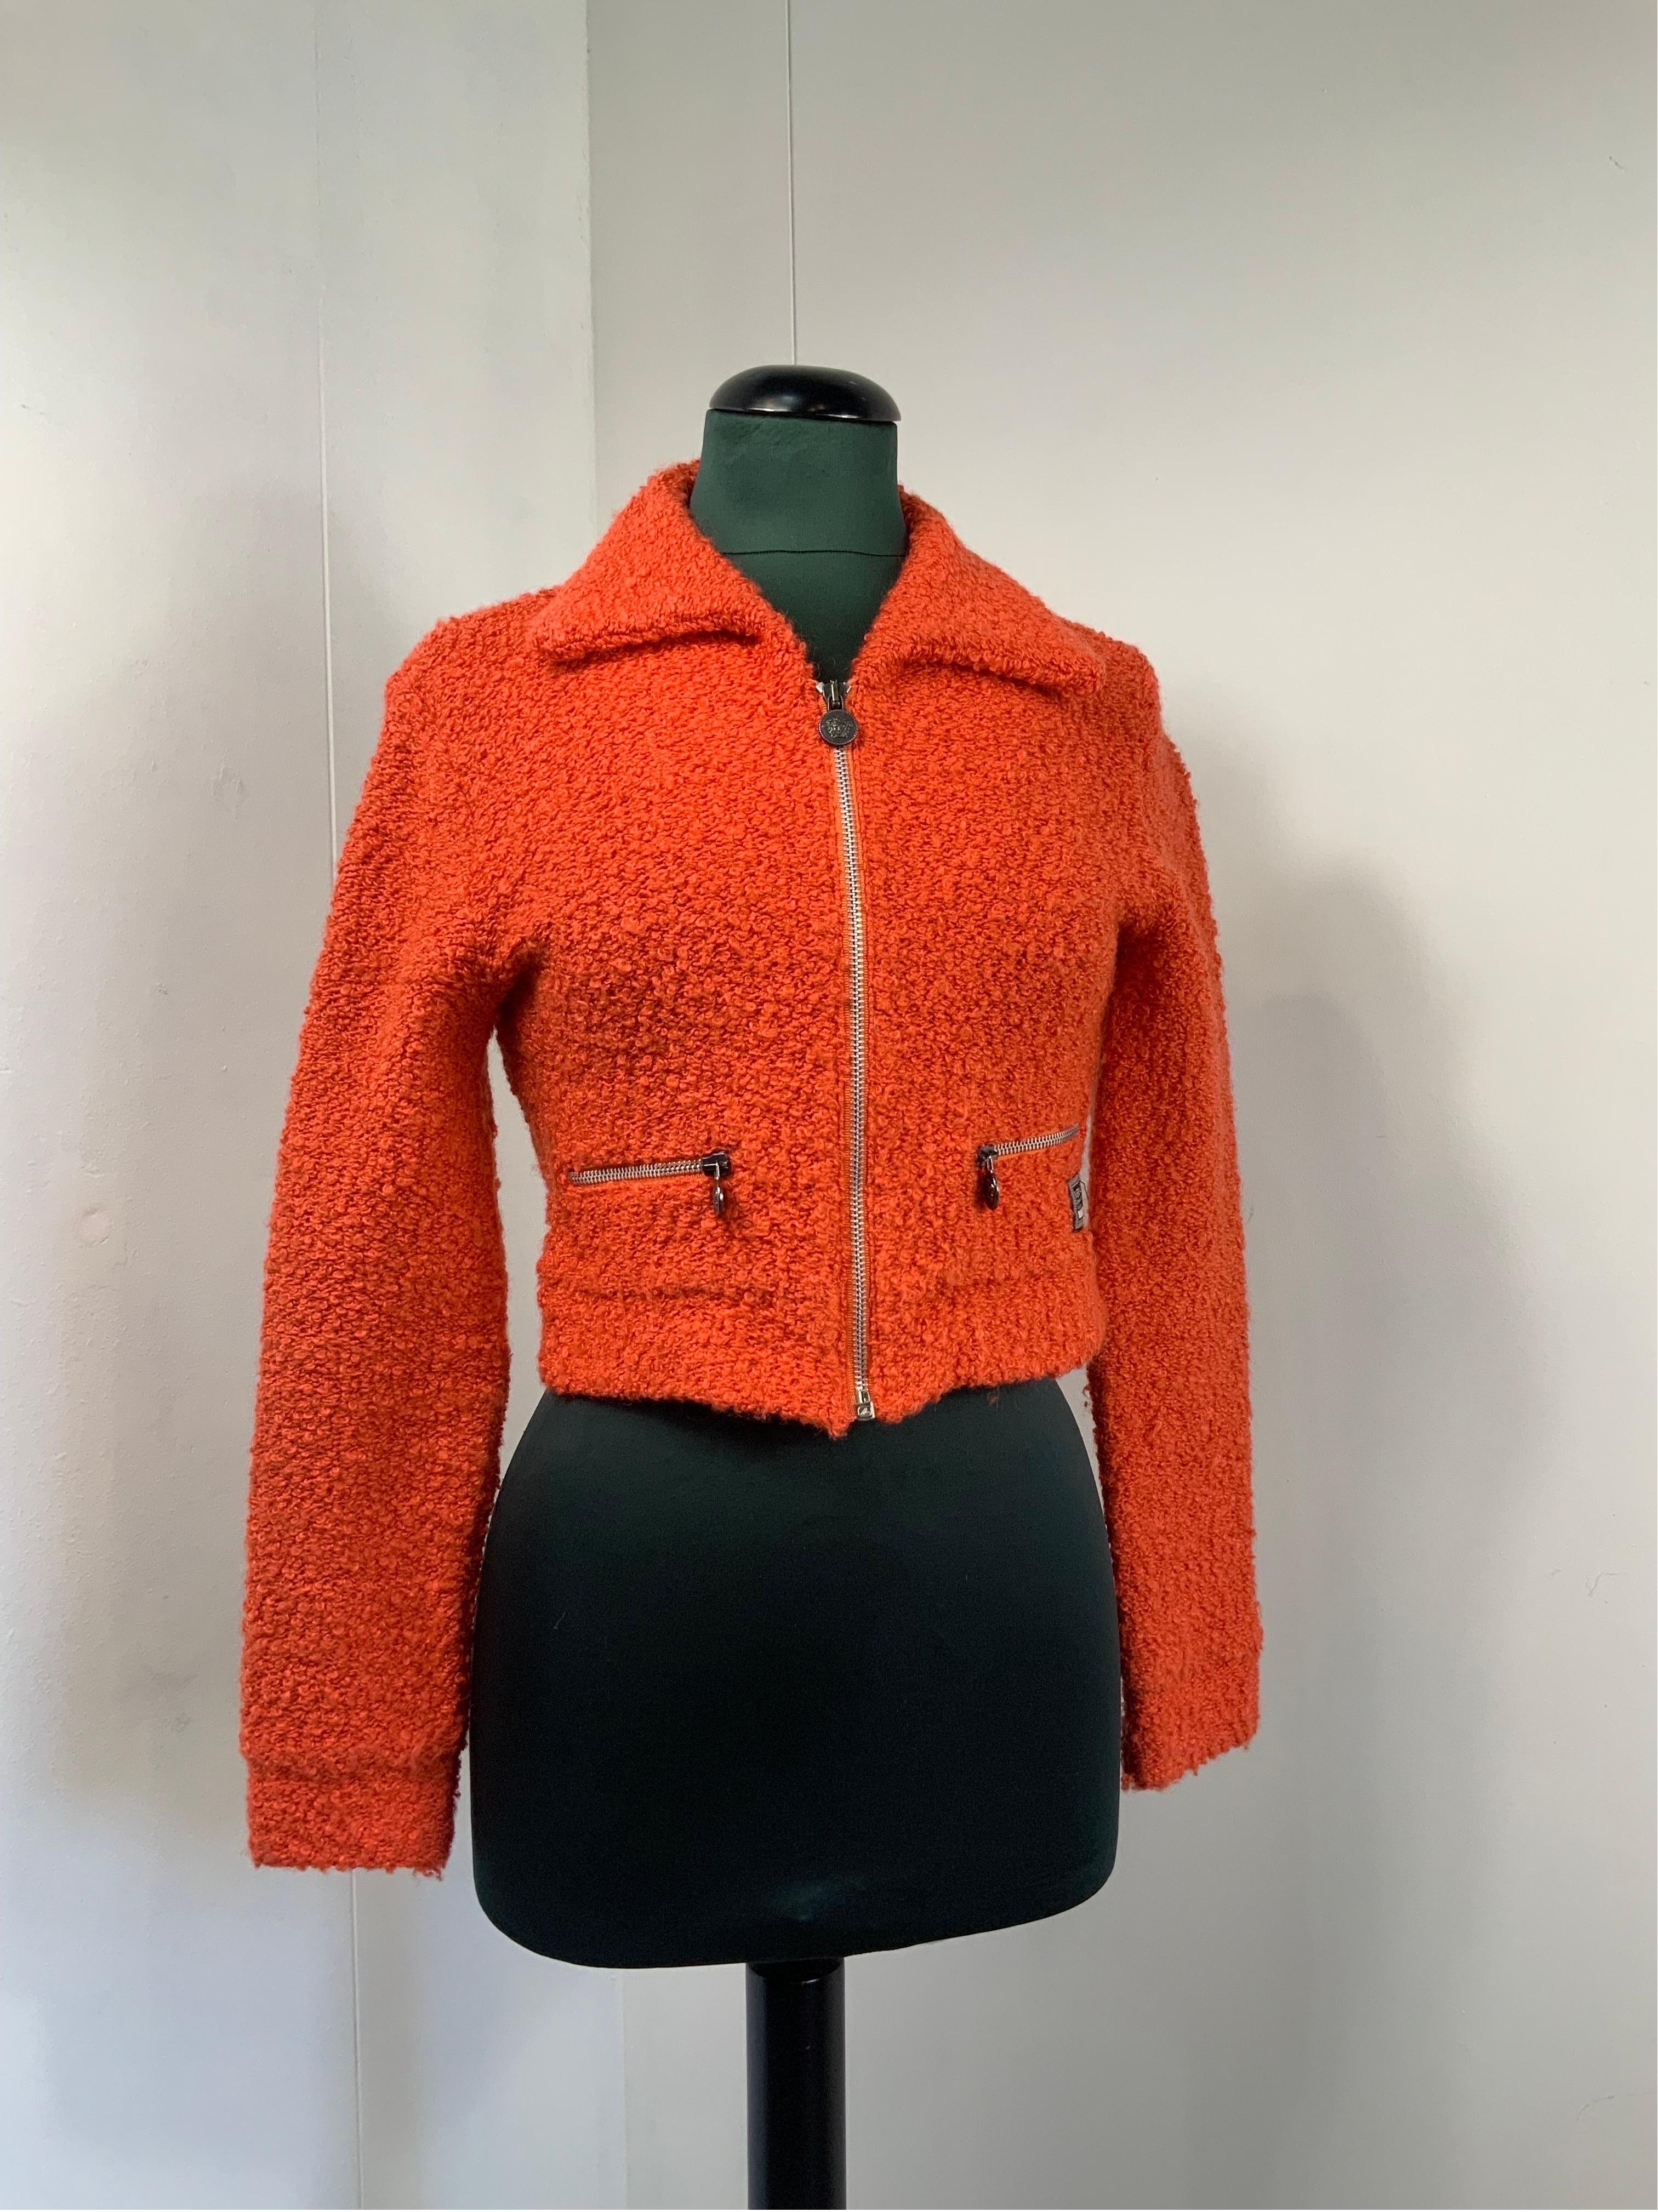 VERSACE JEANS COUTURE BOUCLE JACKET.
In acrylic and polyamide.
Orange bouclé effect fabric.
International size M.
Shoulders 42 cm
Bust 40 cm
Length 50 cm
Channel 60 cm
In good general condition, it shows signs of normal use and some pulled threads.